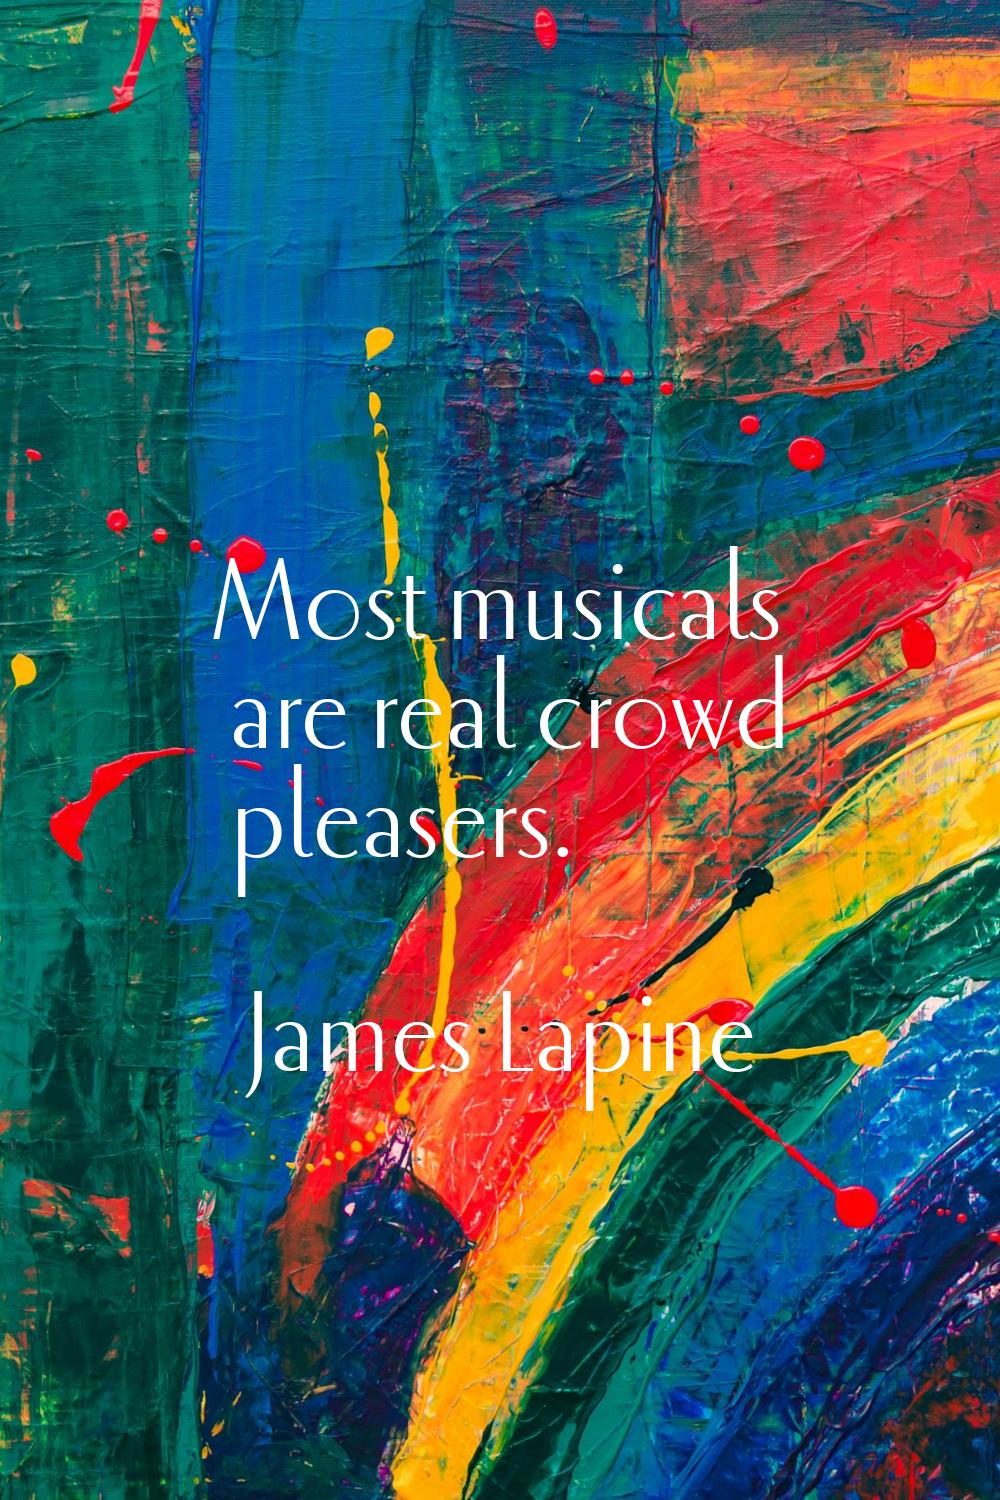 Most musicals are real crowd pleasers.